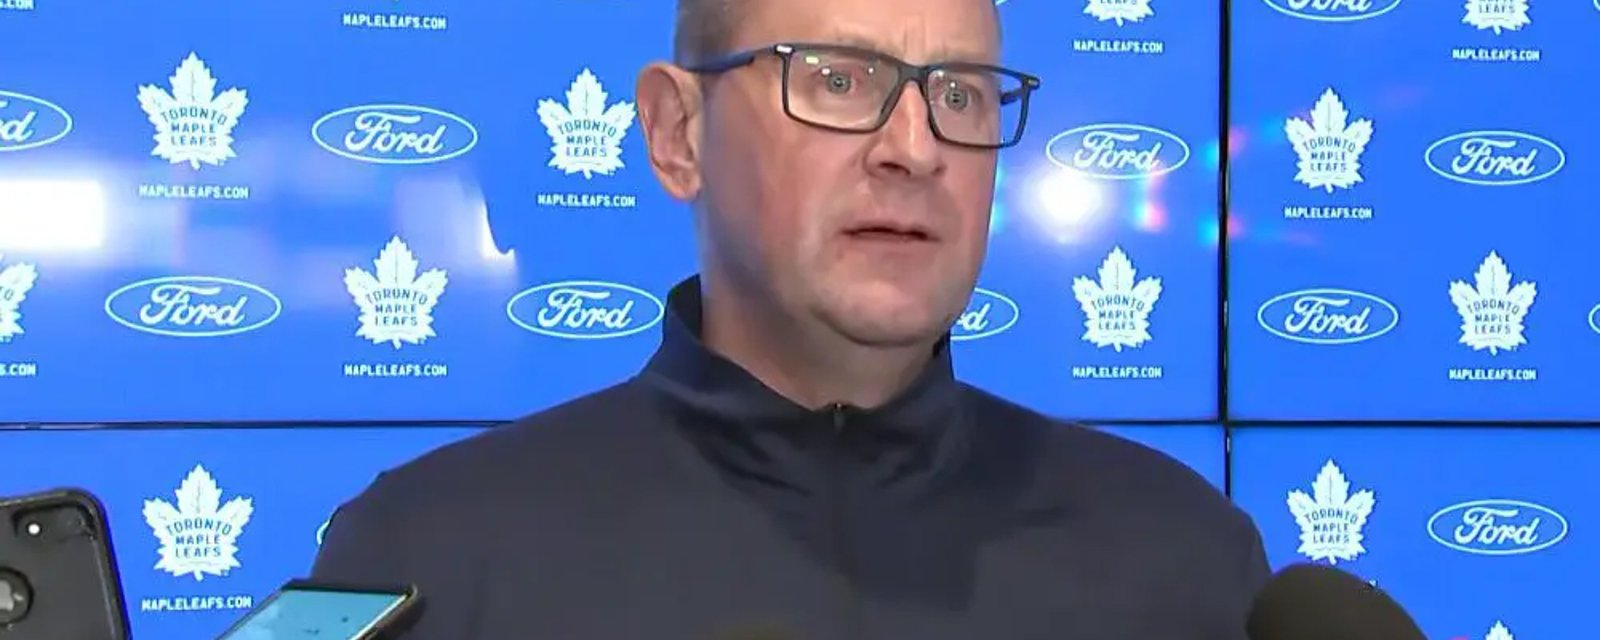 Unbelievably classy move by Leafs GM Brad Treliving